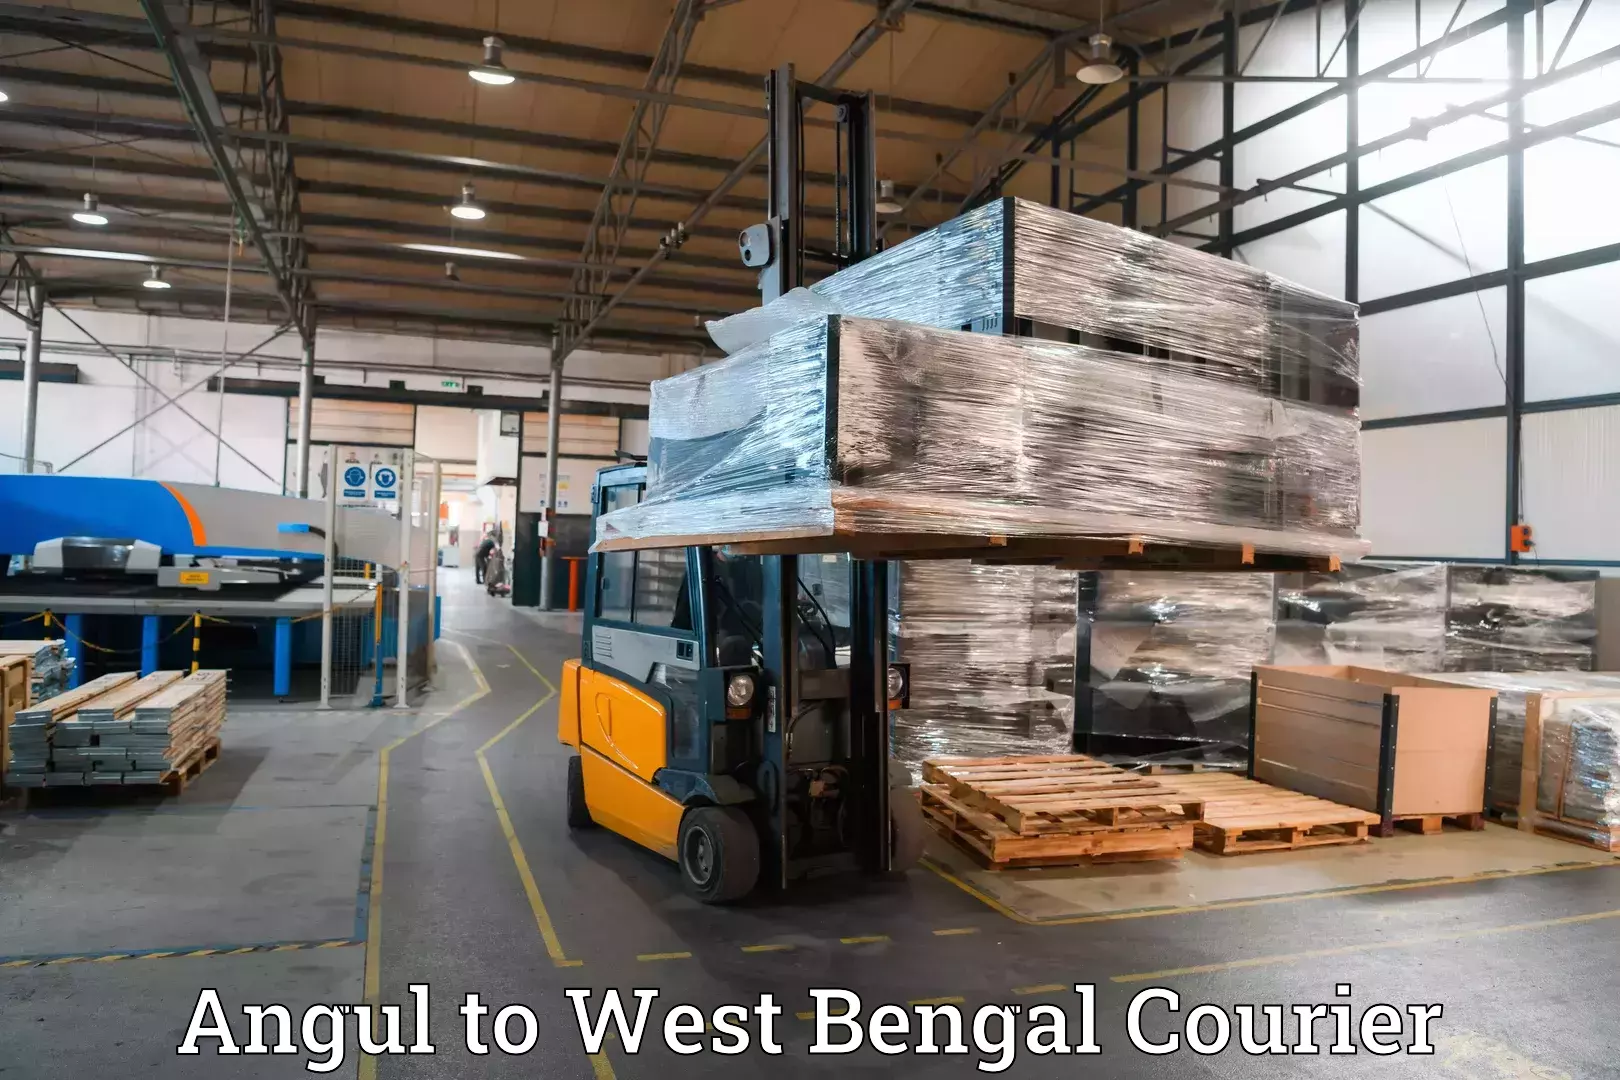 Baggage transport professionals Angul to West Bengal